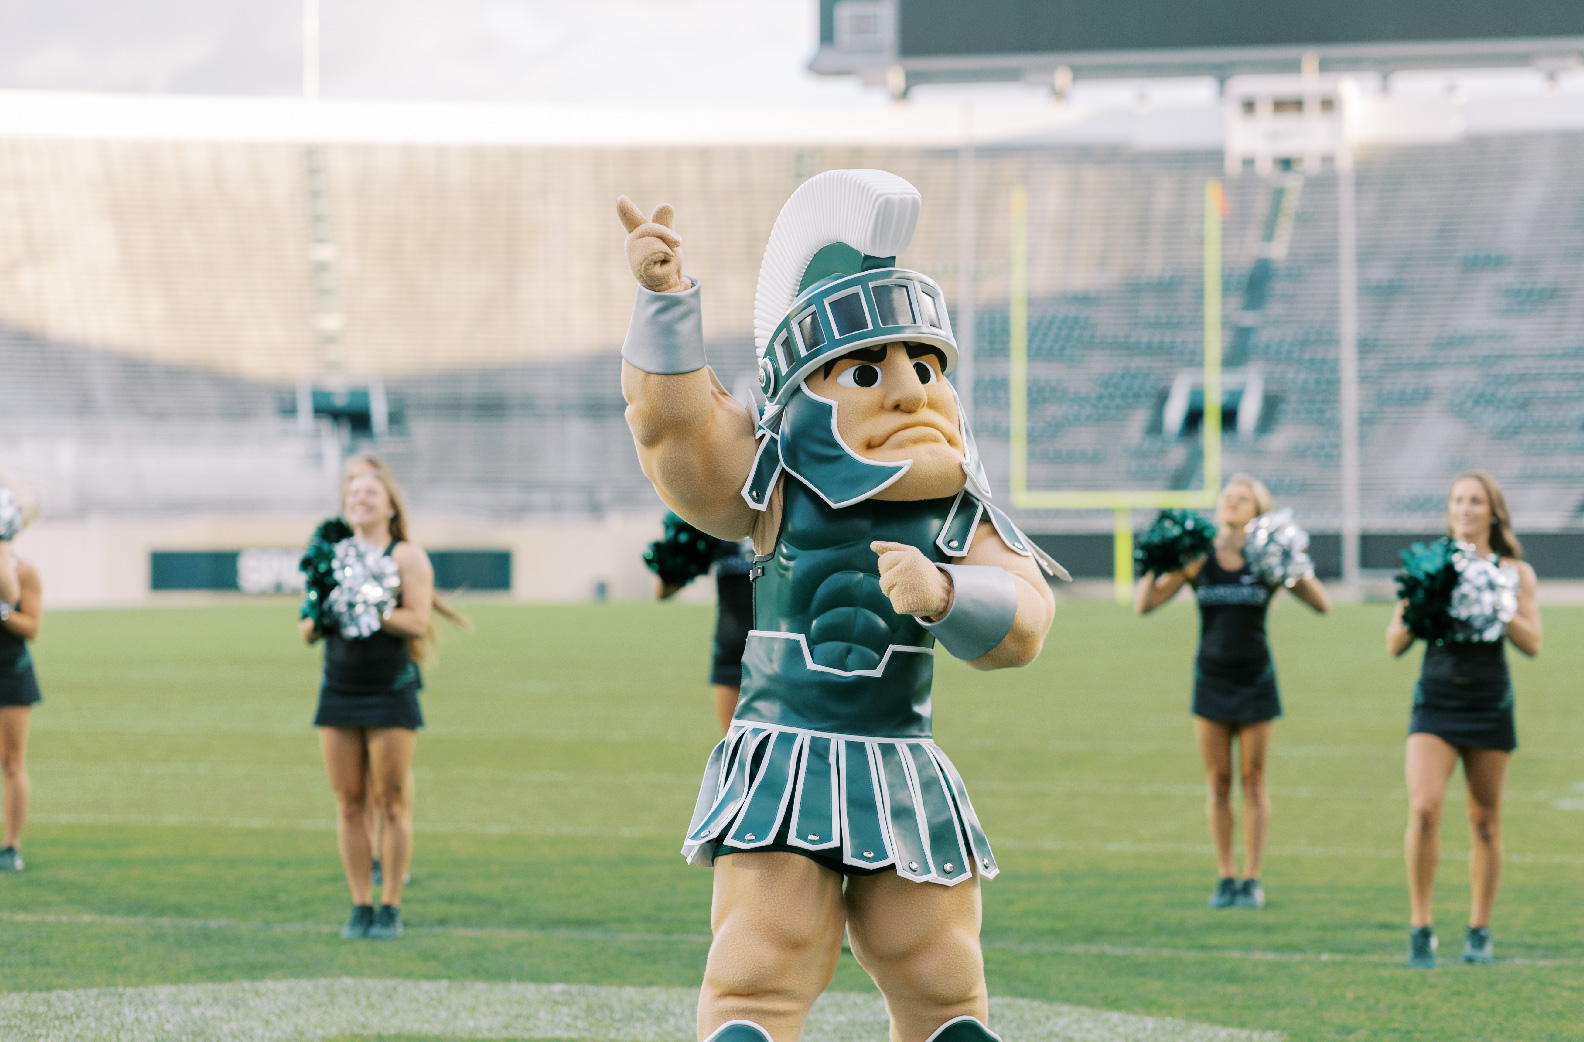 Sparty with the cheer team at Spartan Stadium